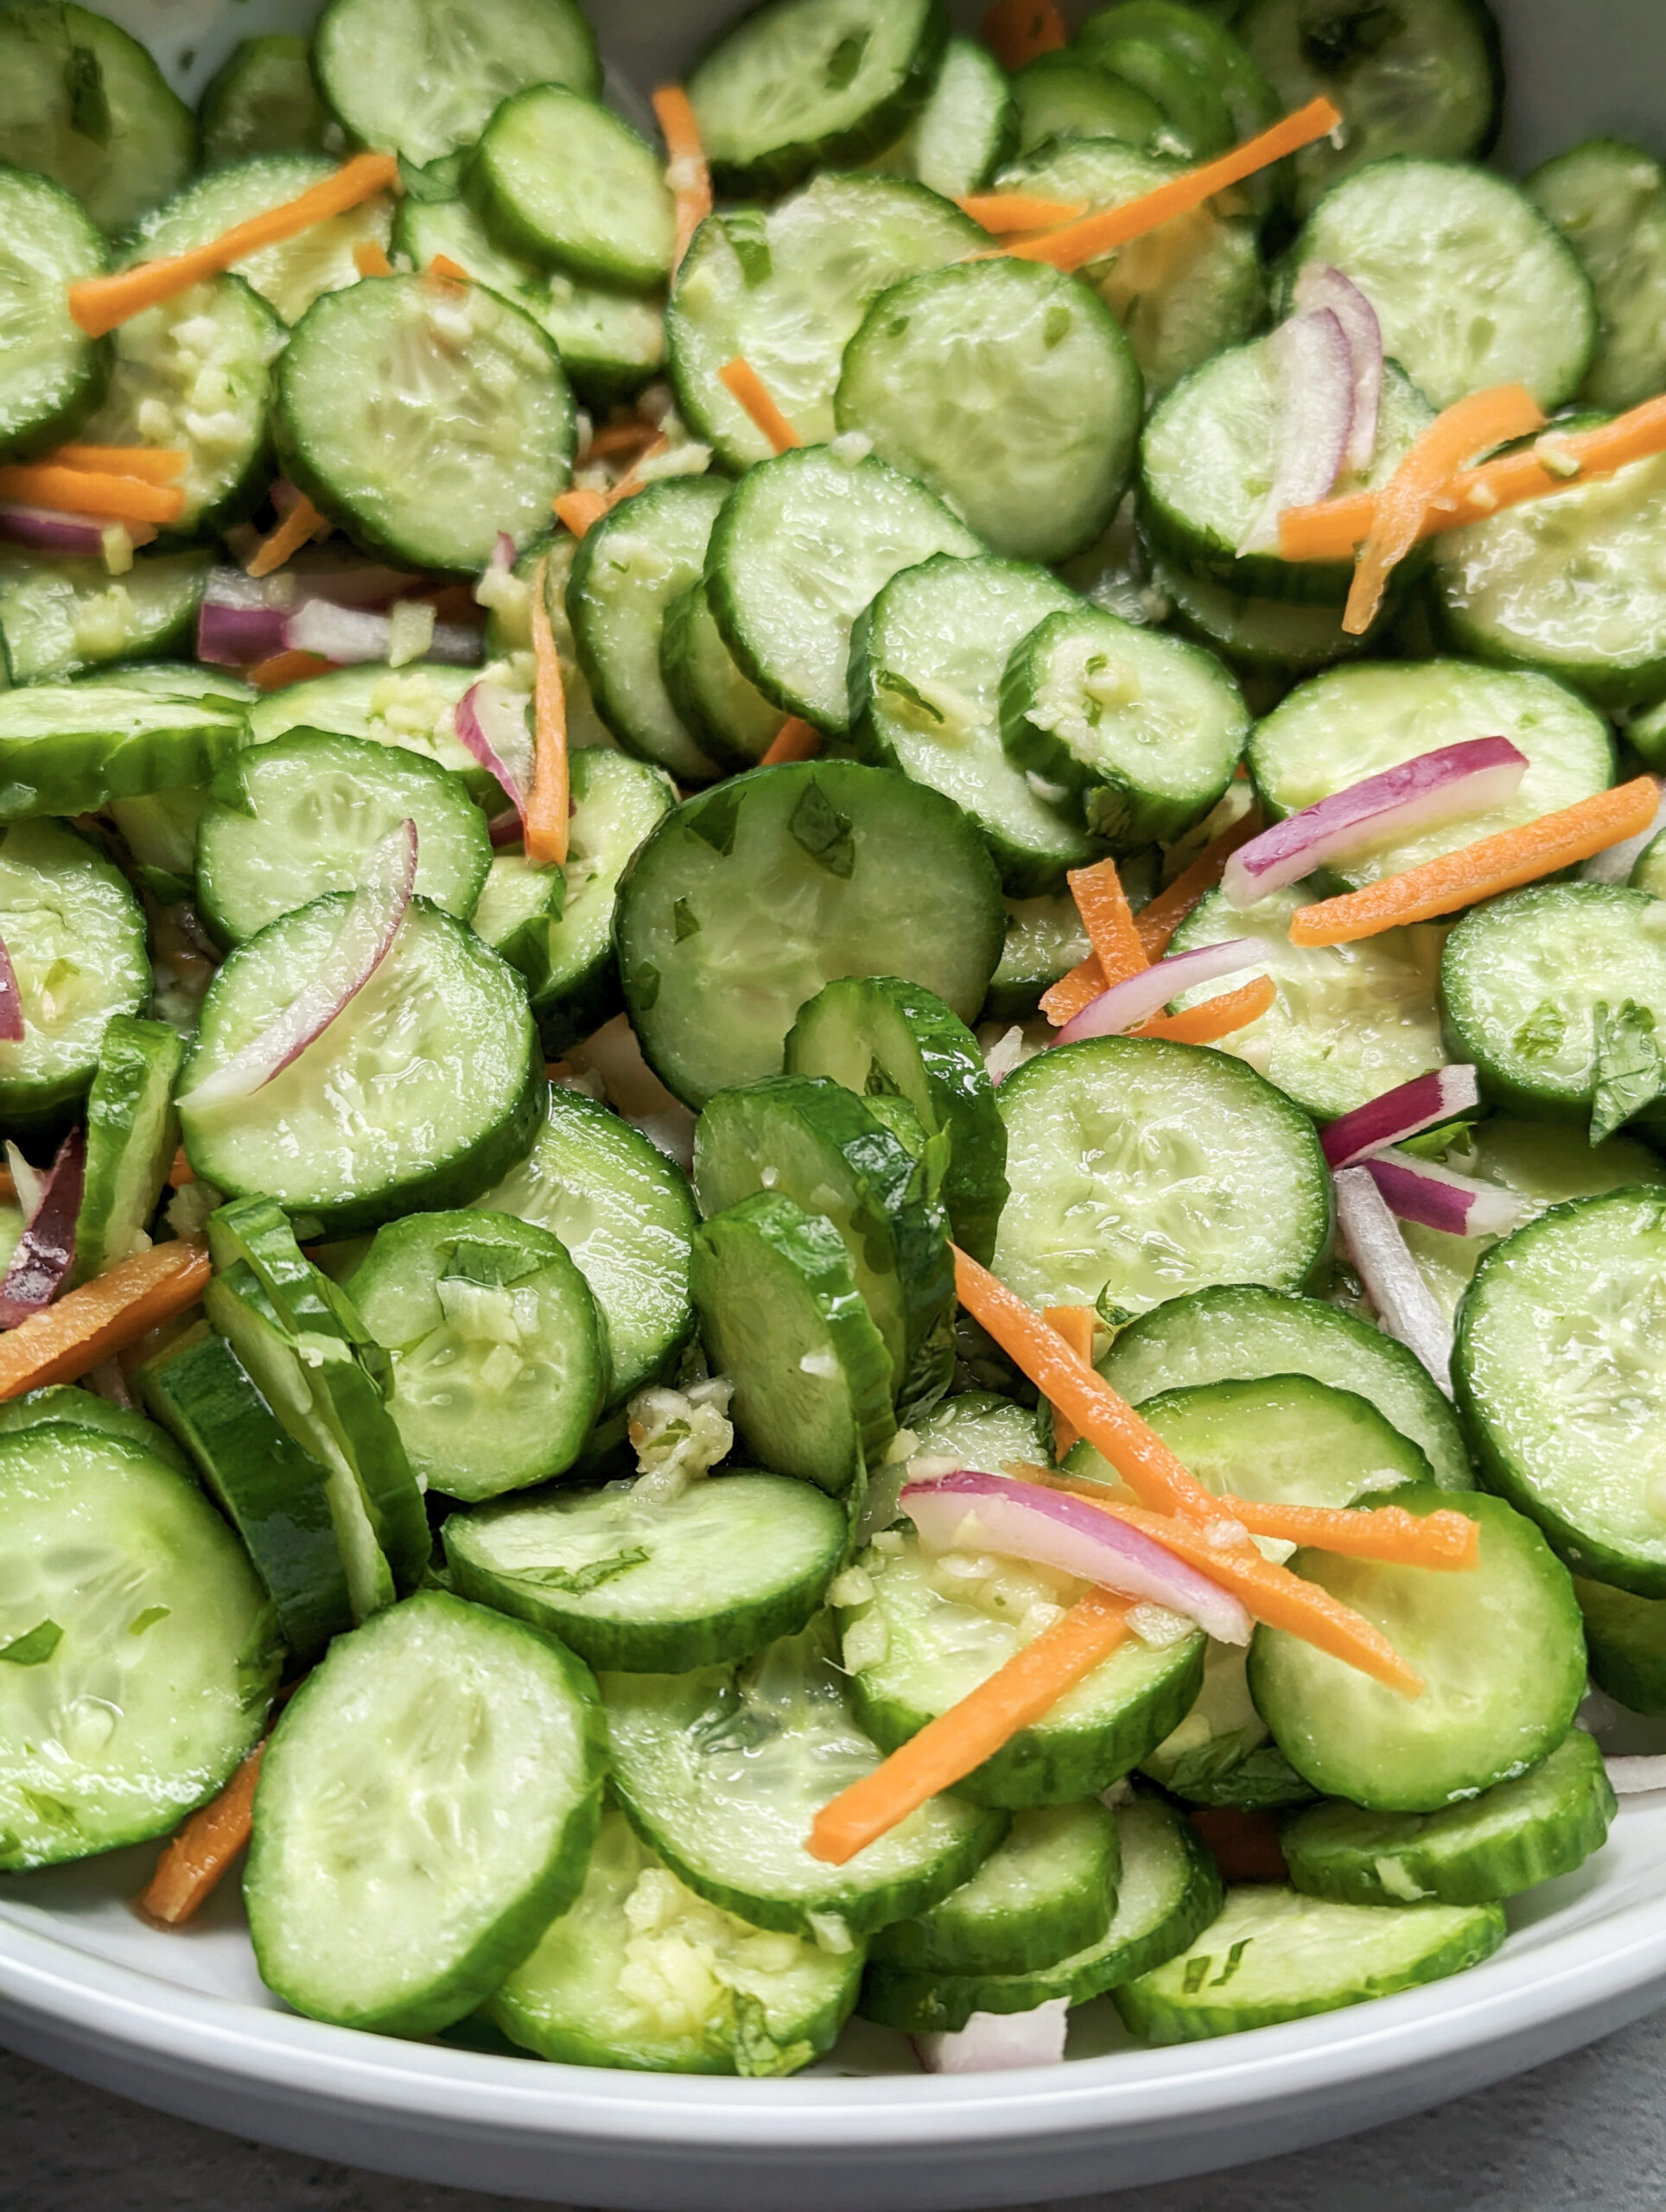 Cucumber carrot salad in a bowl.